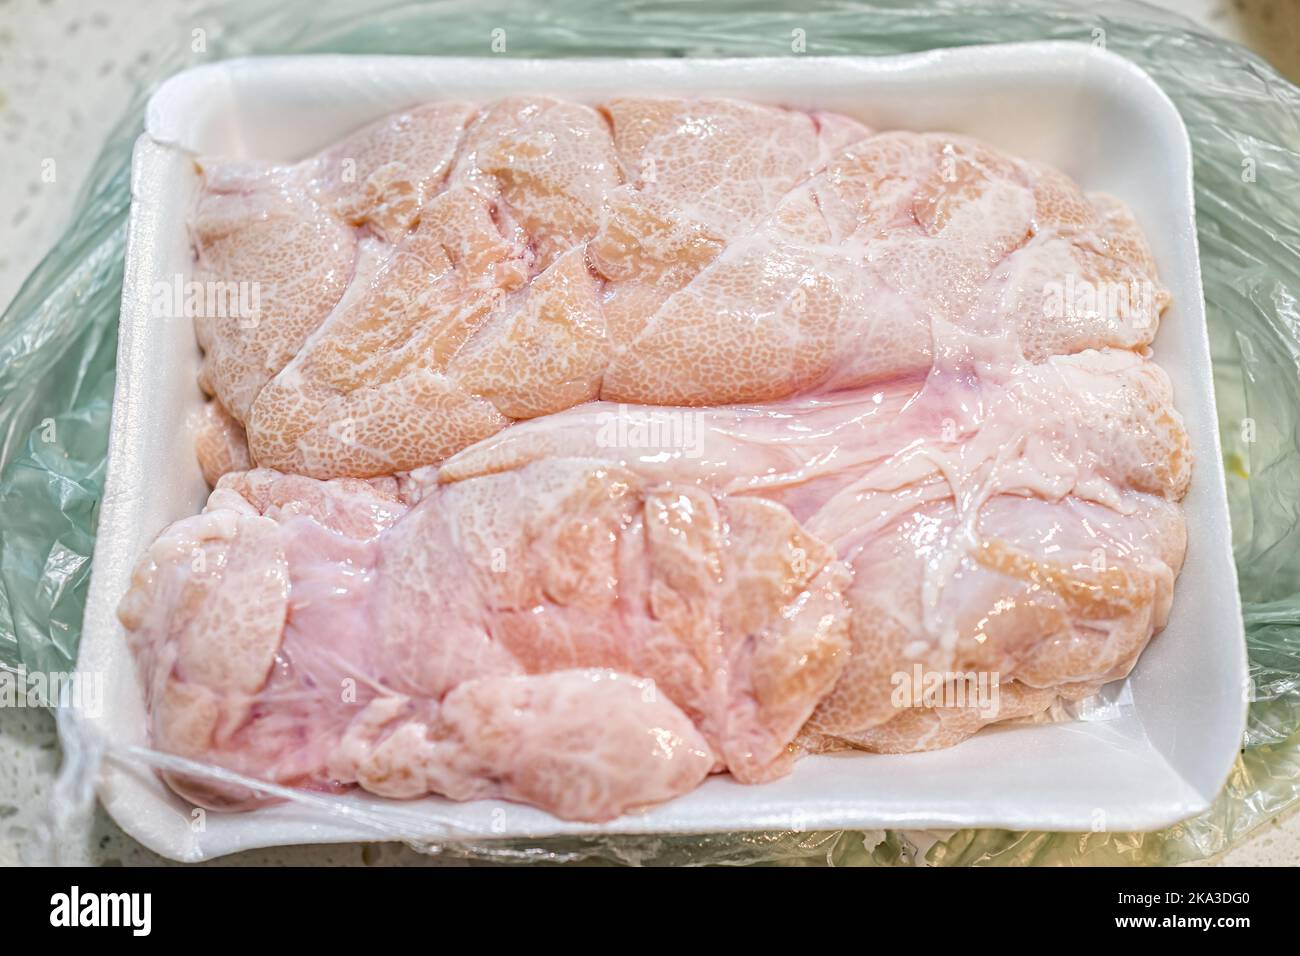 Macro closeup of fresh whole beef sweetbreads thymus organ gland, nutritious ancestral meat food in plastic wrap bag Stock Photo